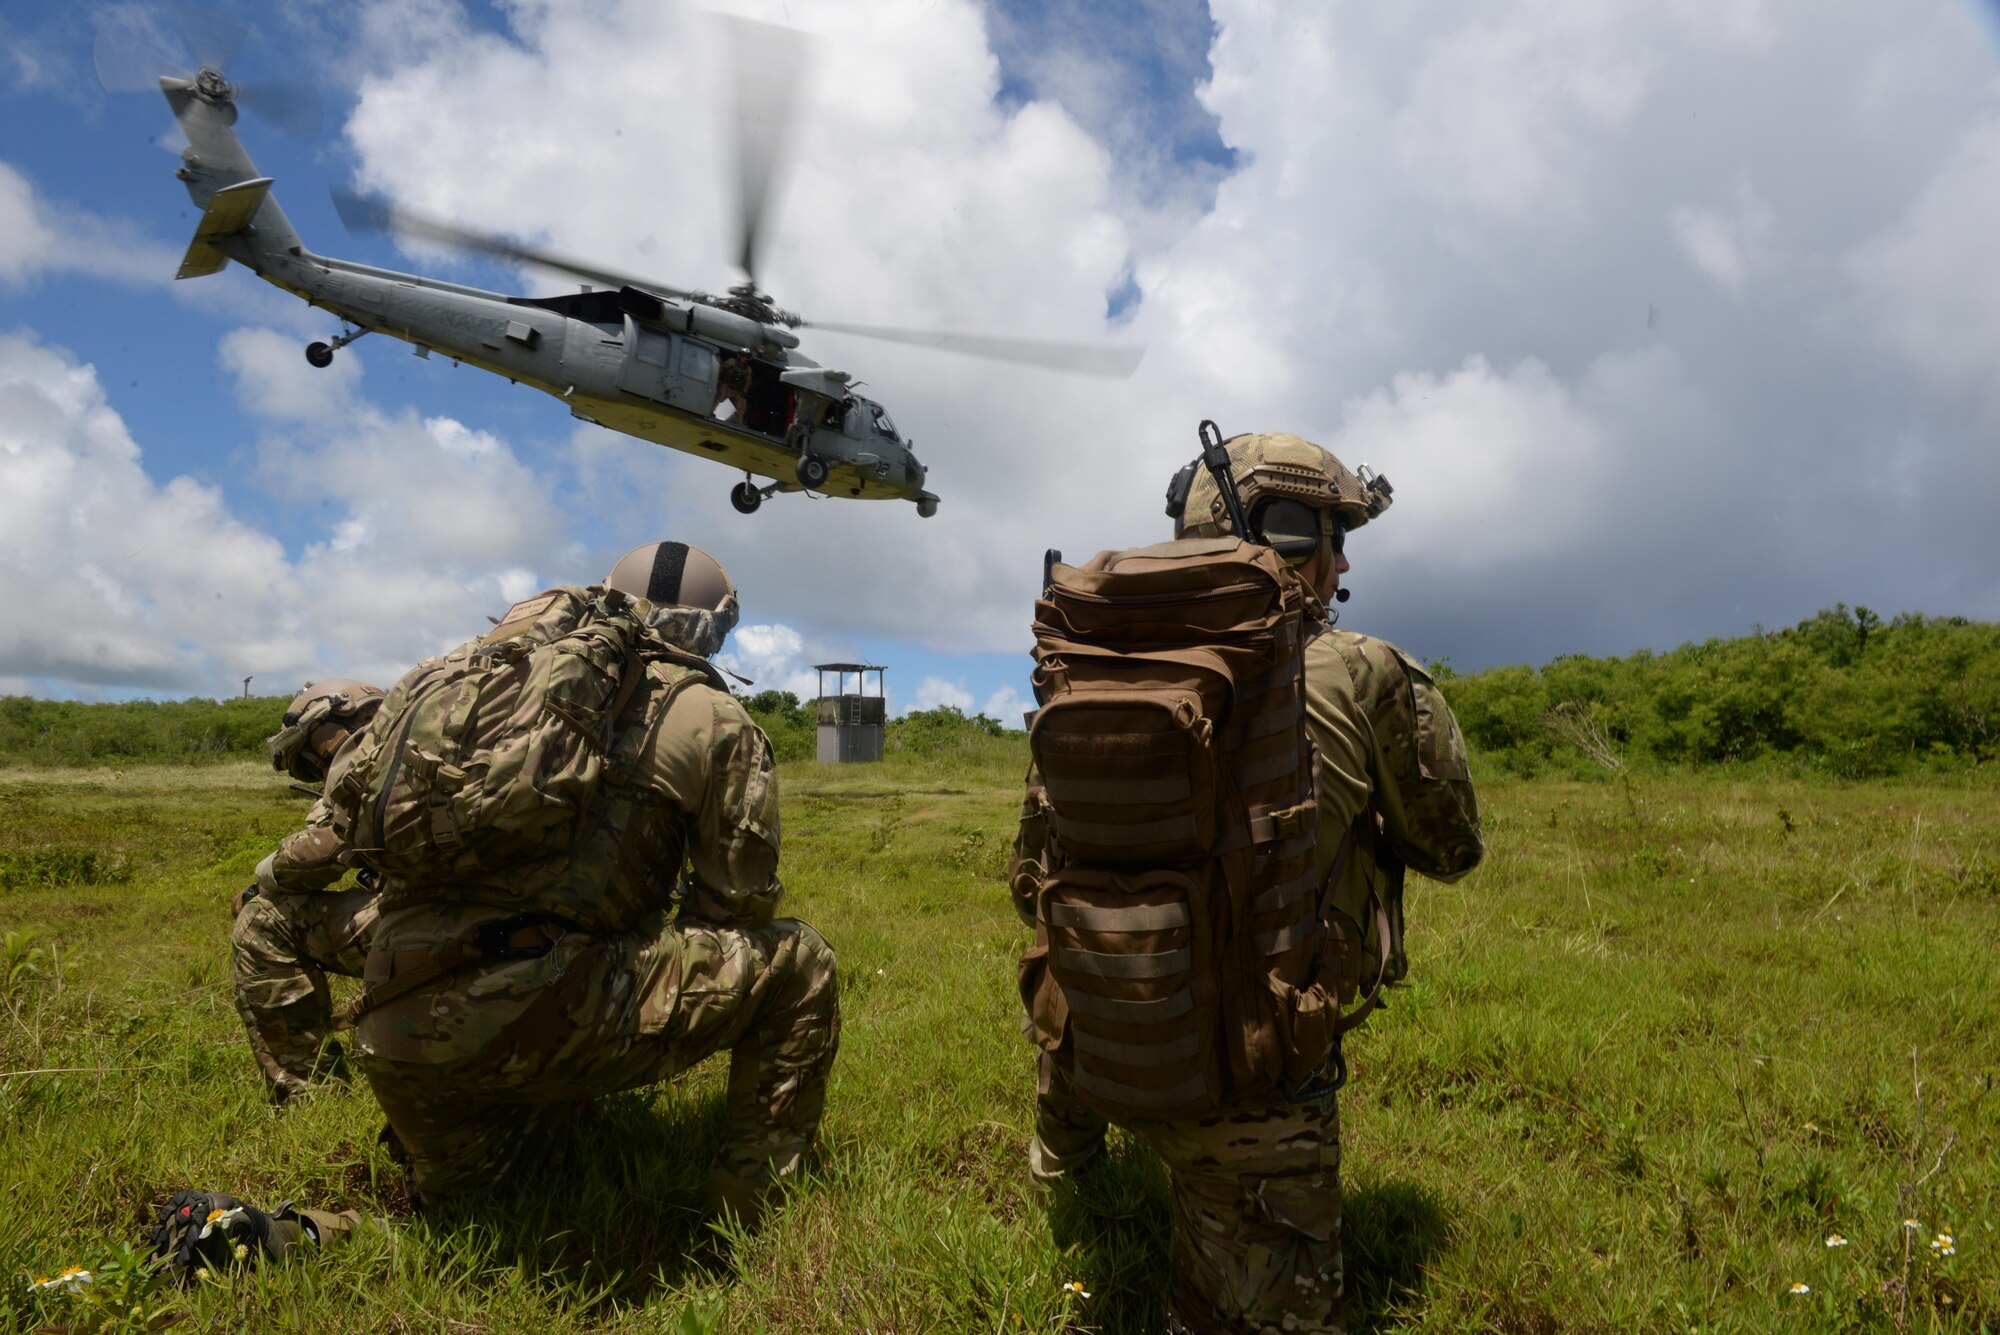 Tactical Air Control Party Airmen with the 3rd Air Support Operations Squadron from Joint Base Elmendorf-Richardson, Alaska, watch as an MH-60S Seahawk takes off July 22, 2015, at Andersen Air Force Base South, Guam. The joint terminal attack controller team conducted essential close air support training. (U.S. Air Force photo/Staff Sgt. Alexander W. Riedel/Released)